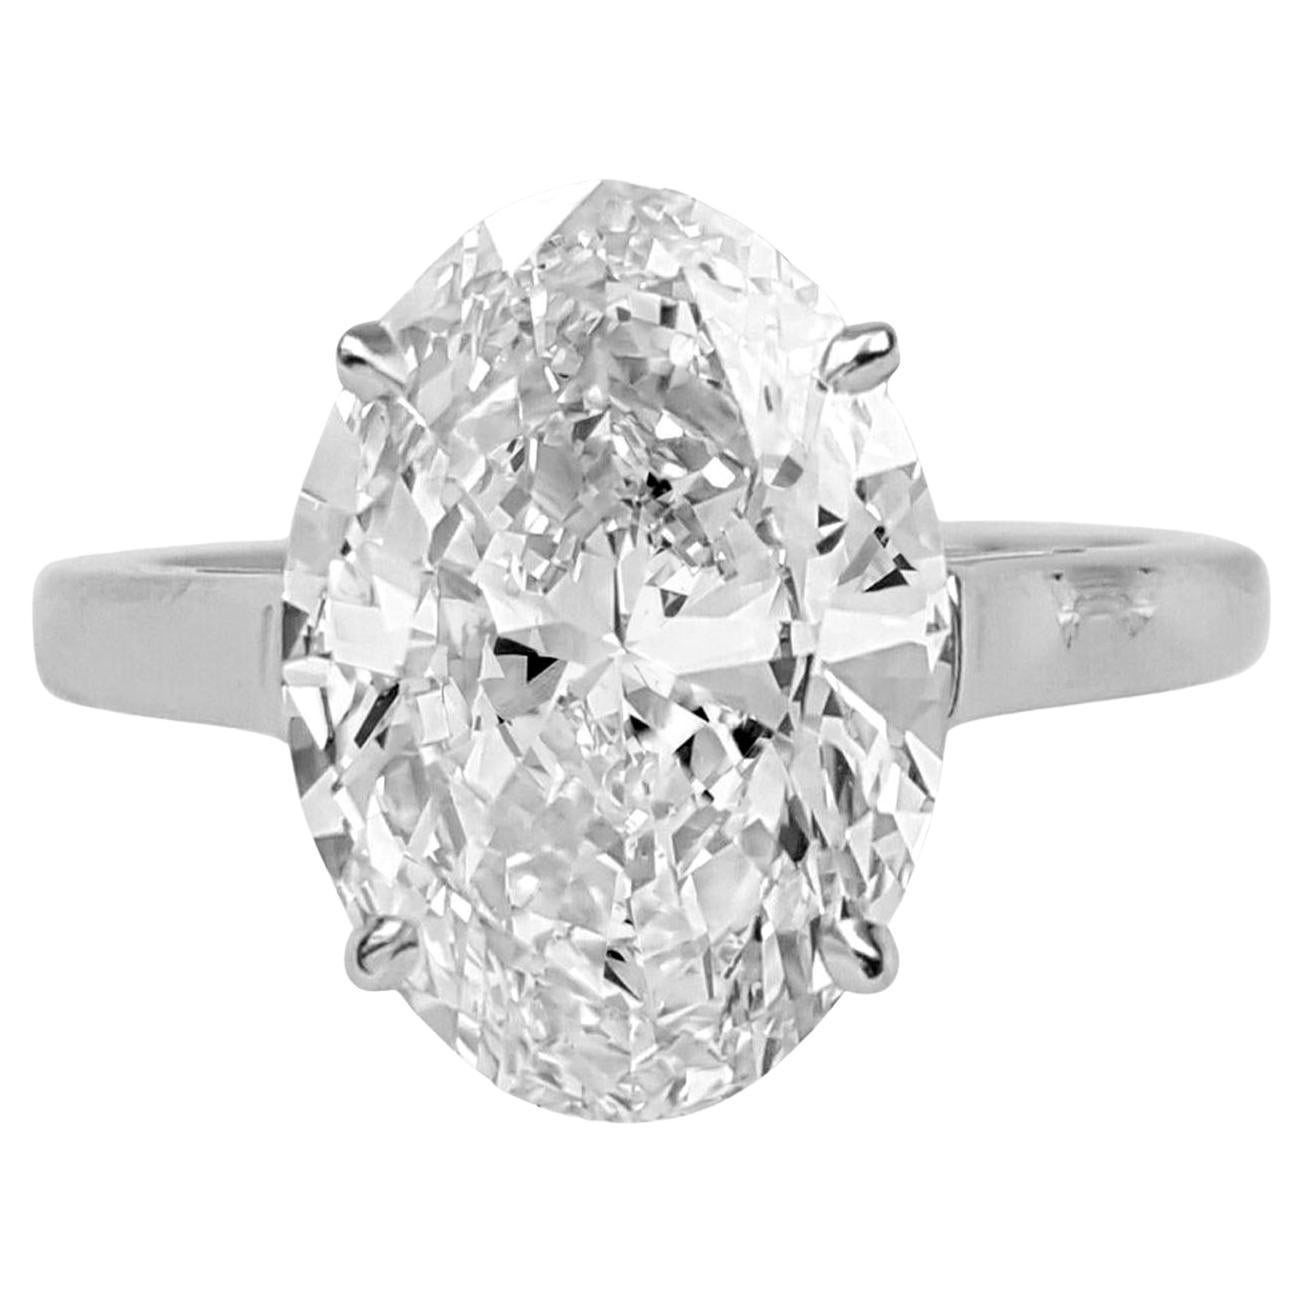 Tiffany & Co. 5 Carat Oval Diamond Platinum Engagement Ring F COLOR VS1 Clarity For Sale